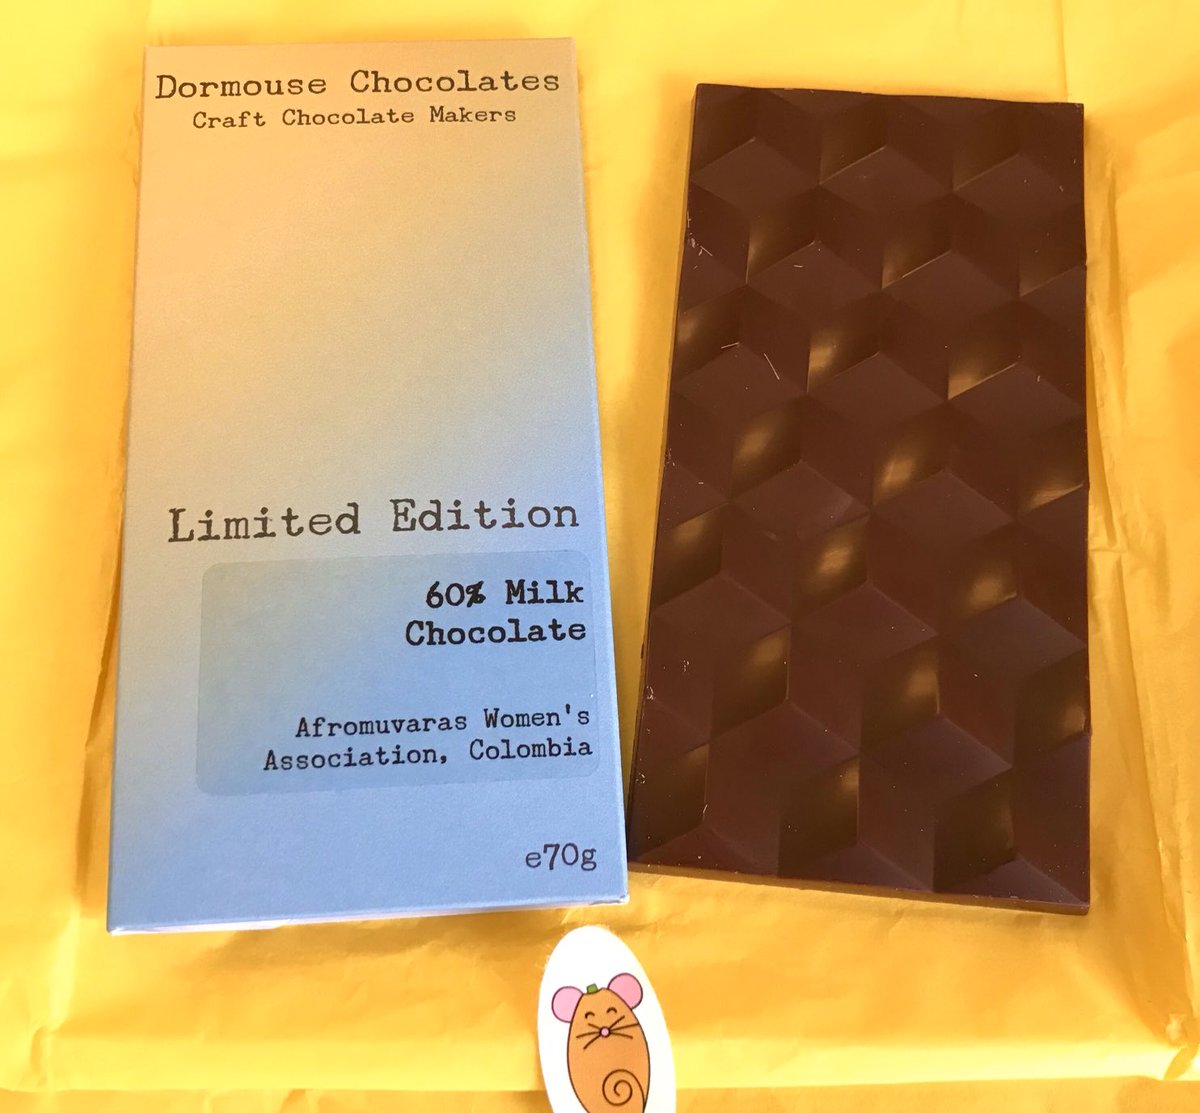 Today we are devouring with great delight this beautiful dark milk made by my friends at ⁦@Dormousechocs⁩ in Manchester with beans from the women of Afromuvaras in Colombia. Dormouse source their beans with all the care that they also put into making their bars. Fab